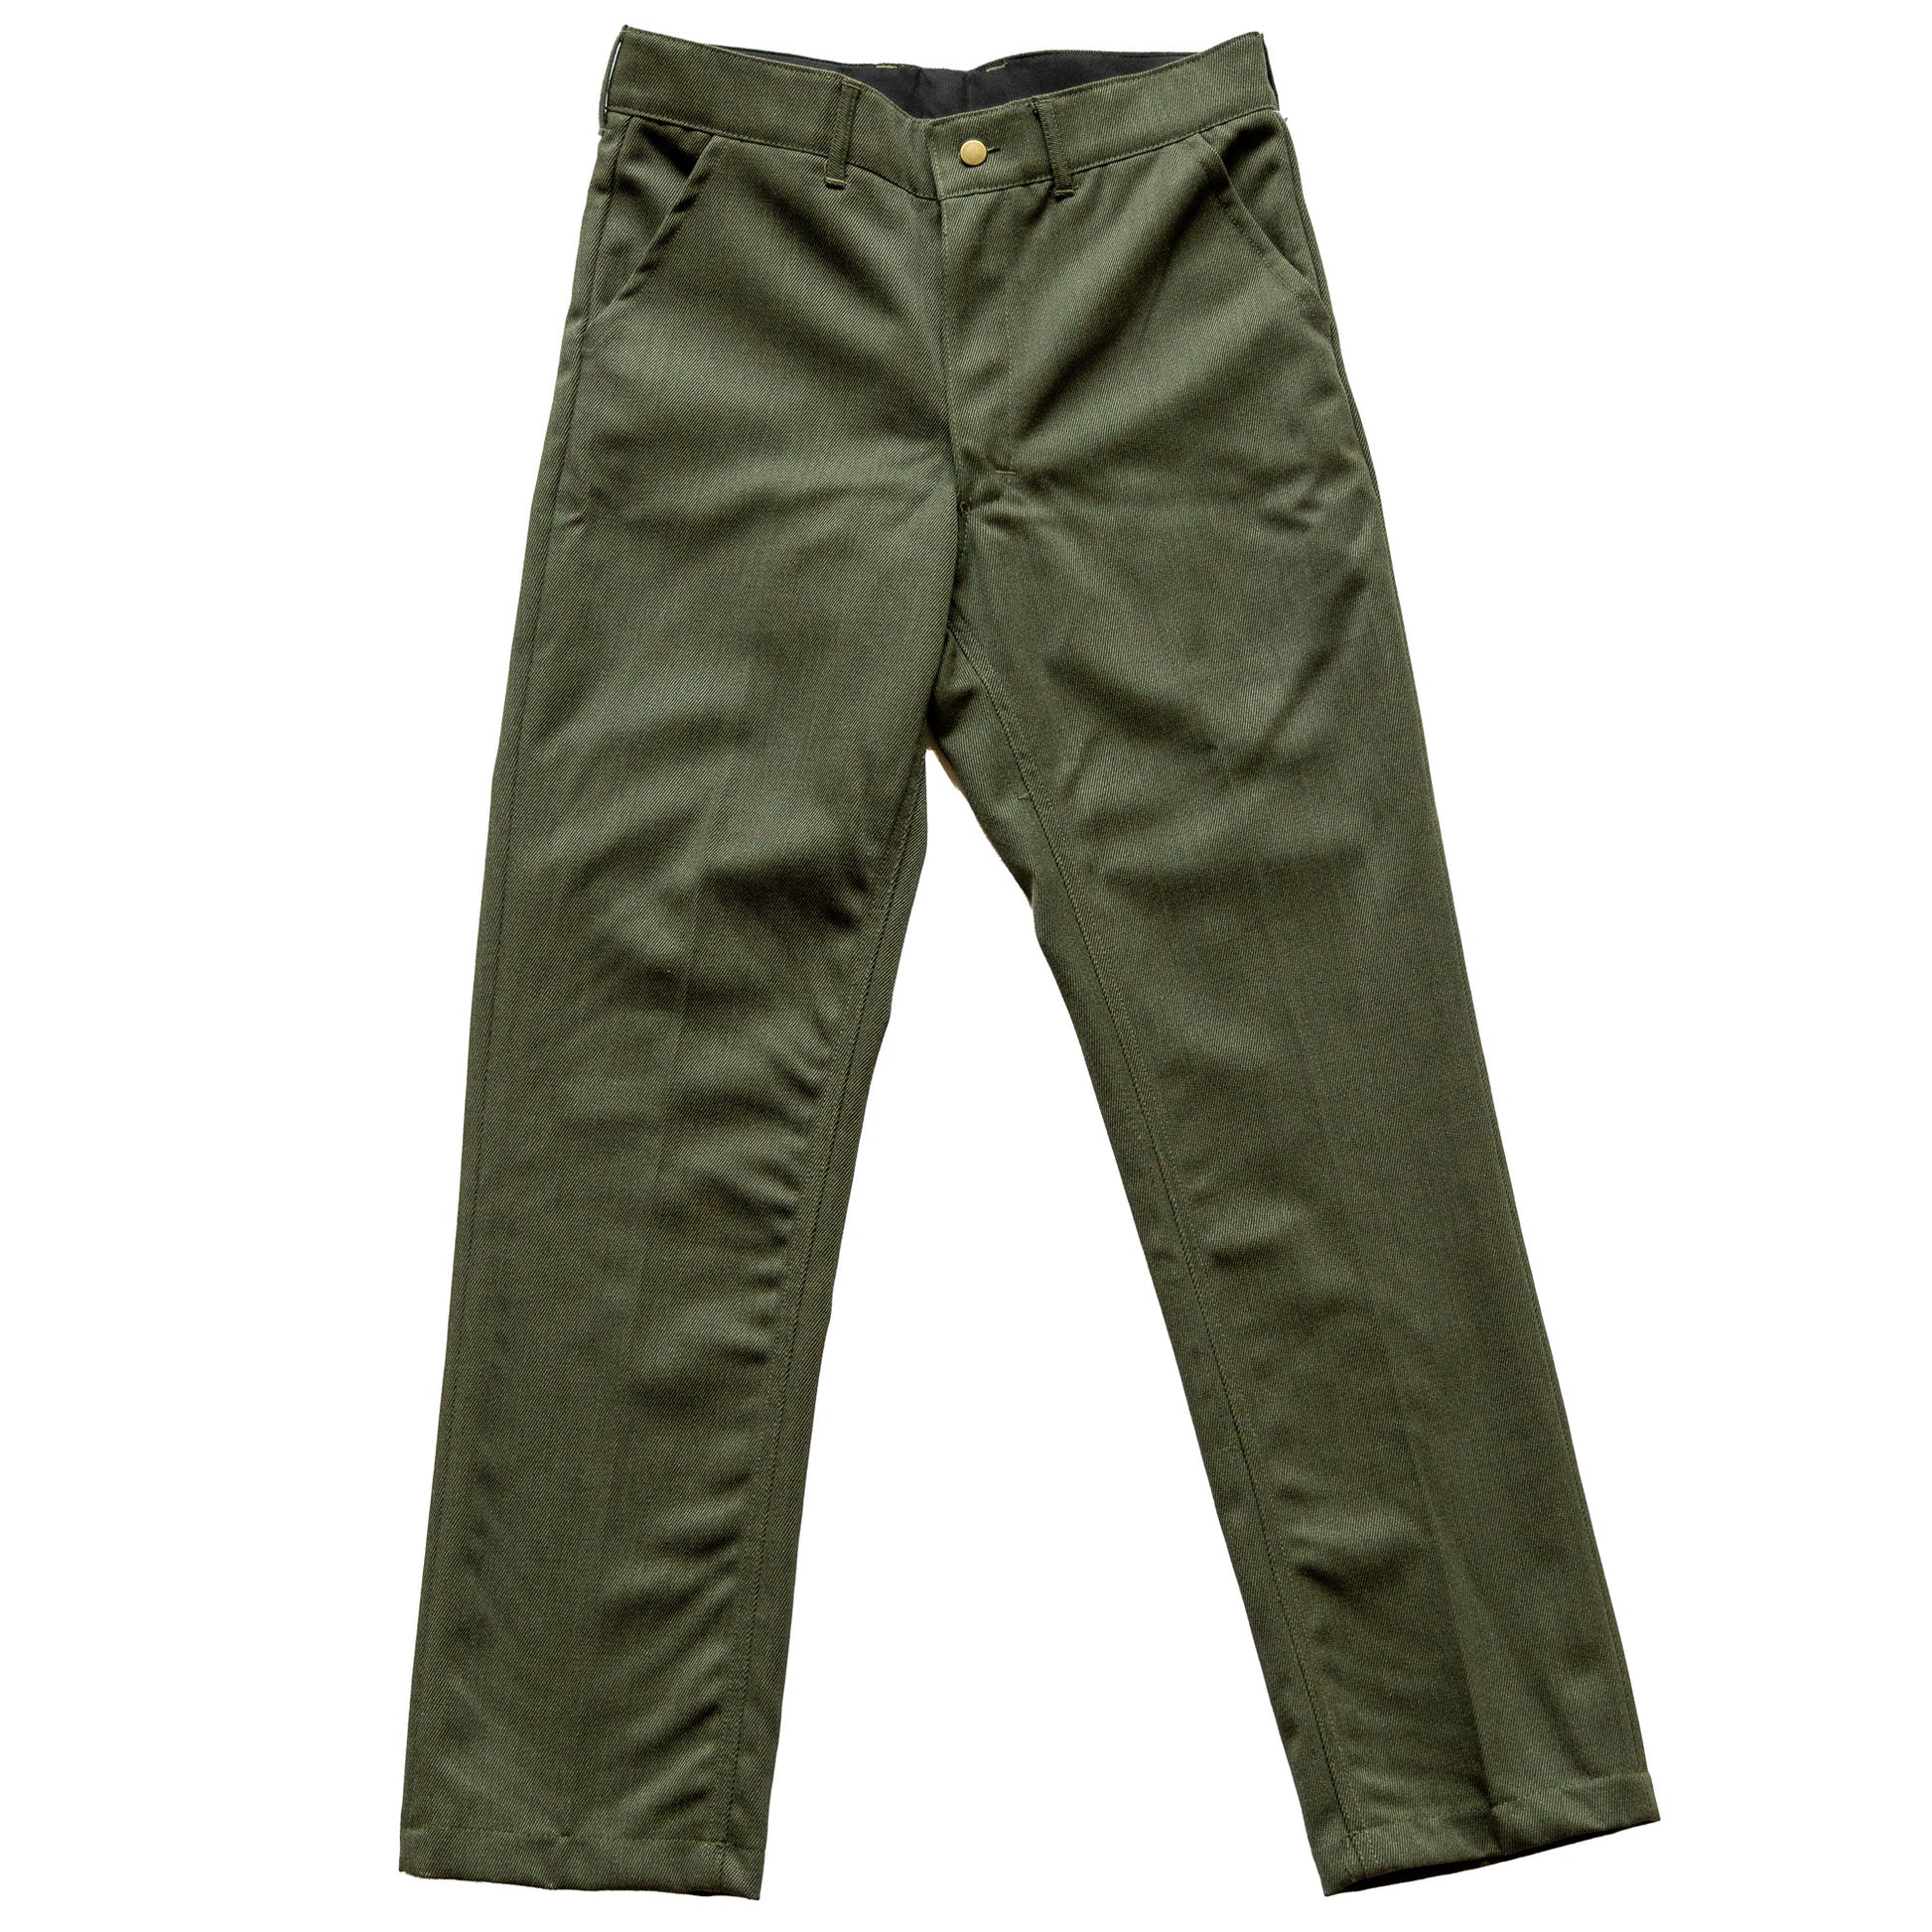 Northwoods 1842 wool green pants front view